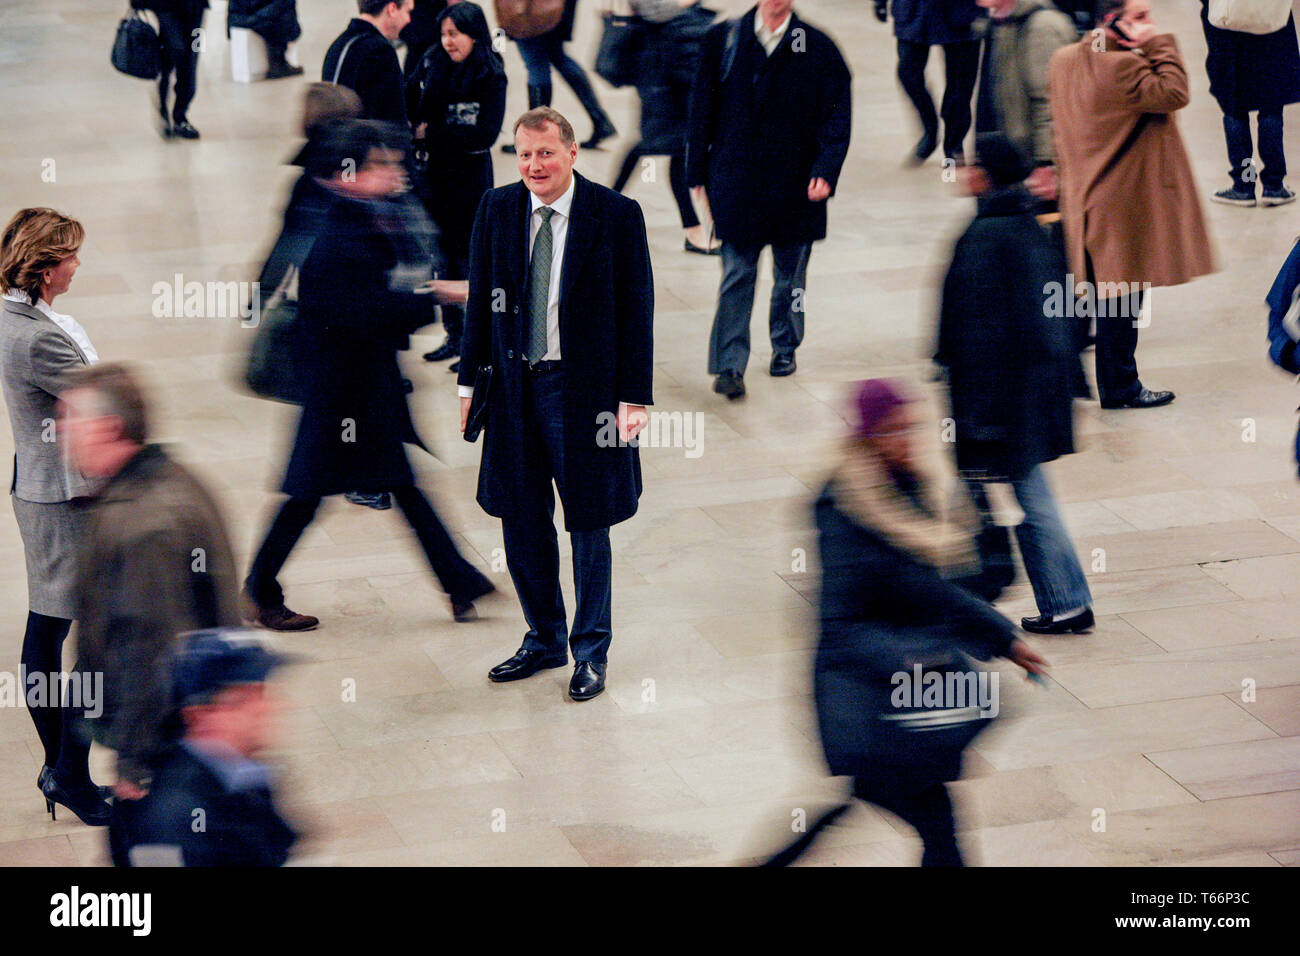 CEO of the Norwegian Bank DNB, Rune Bjerke in Grand Central Station in New York Stock Photo